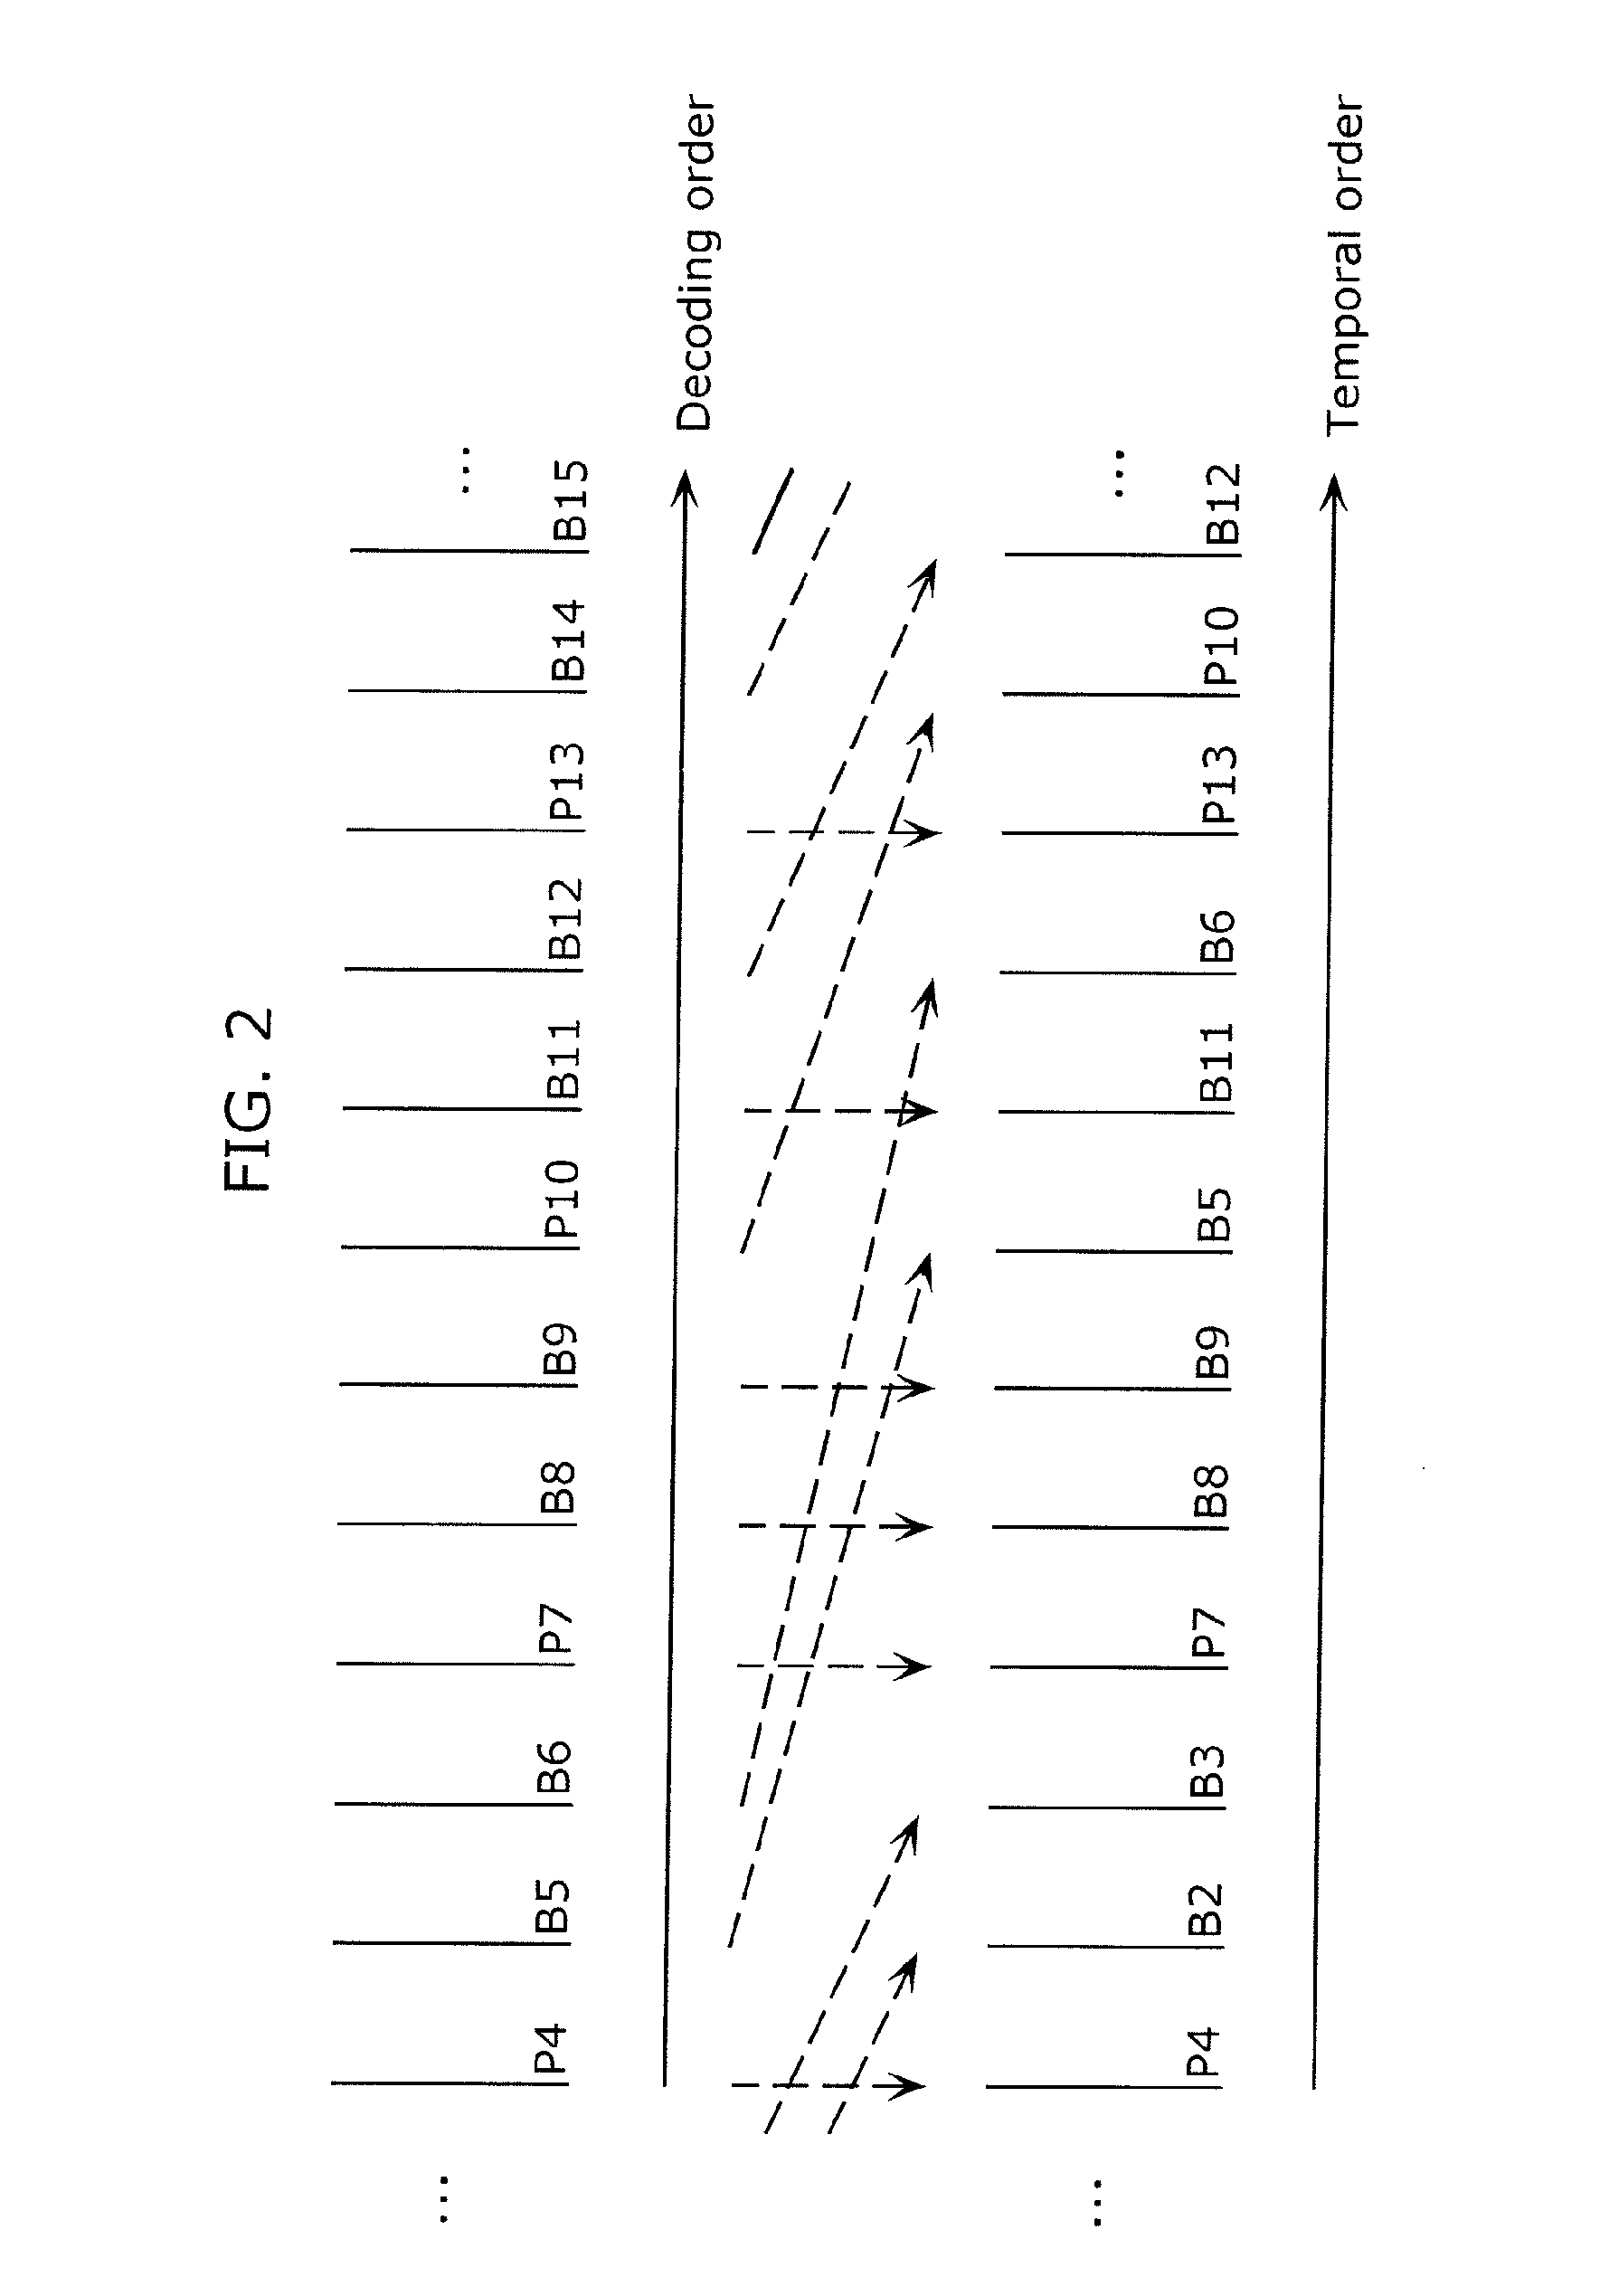 Moving picture decoding apparatus